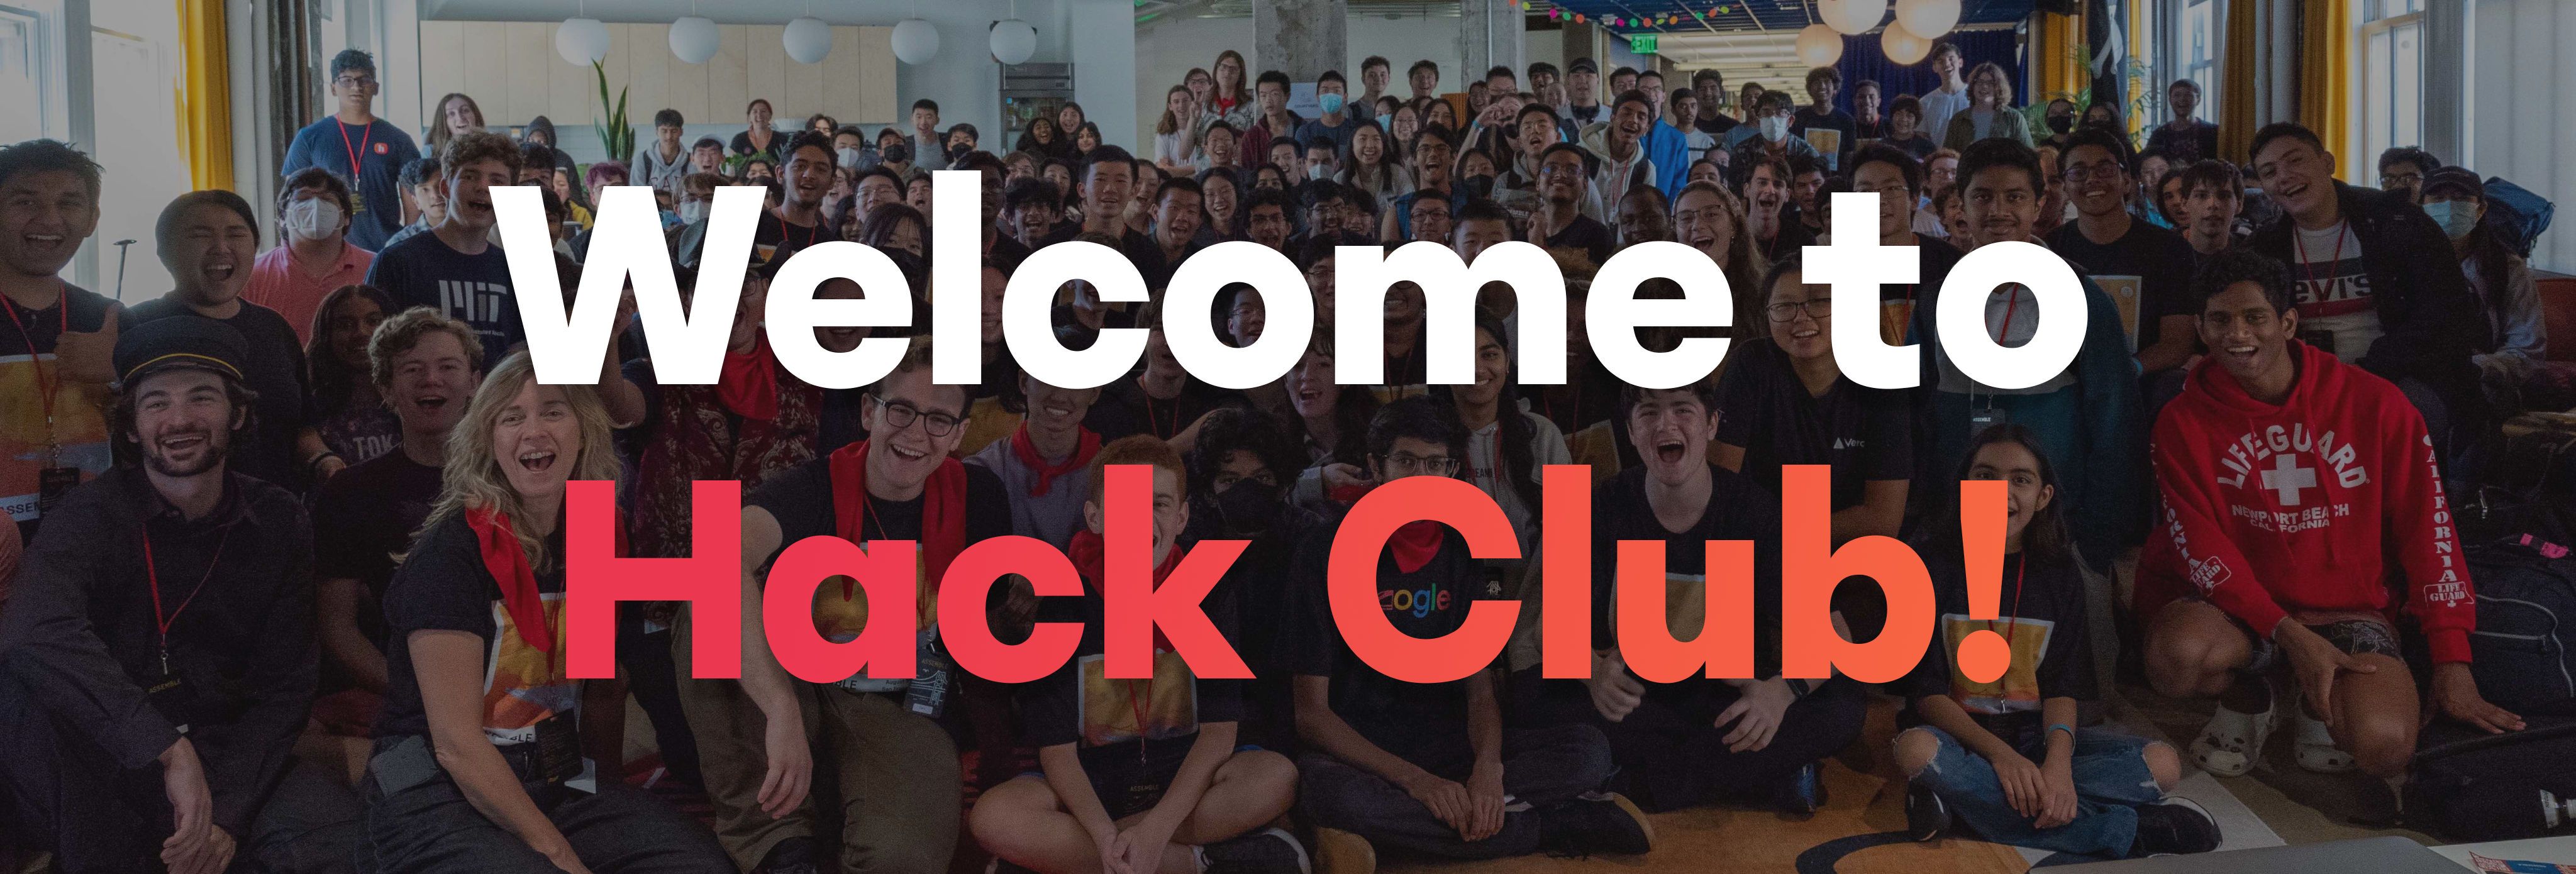 Welcome to Hack Club!